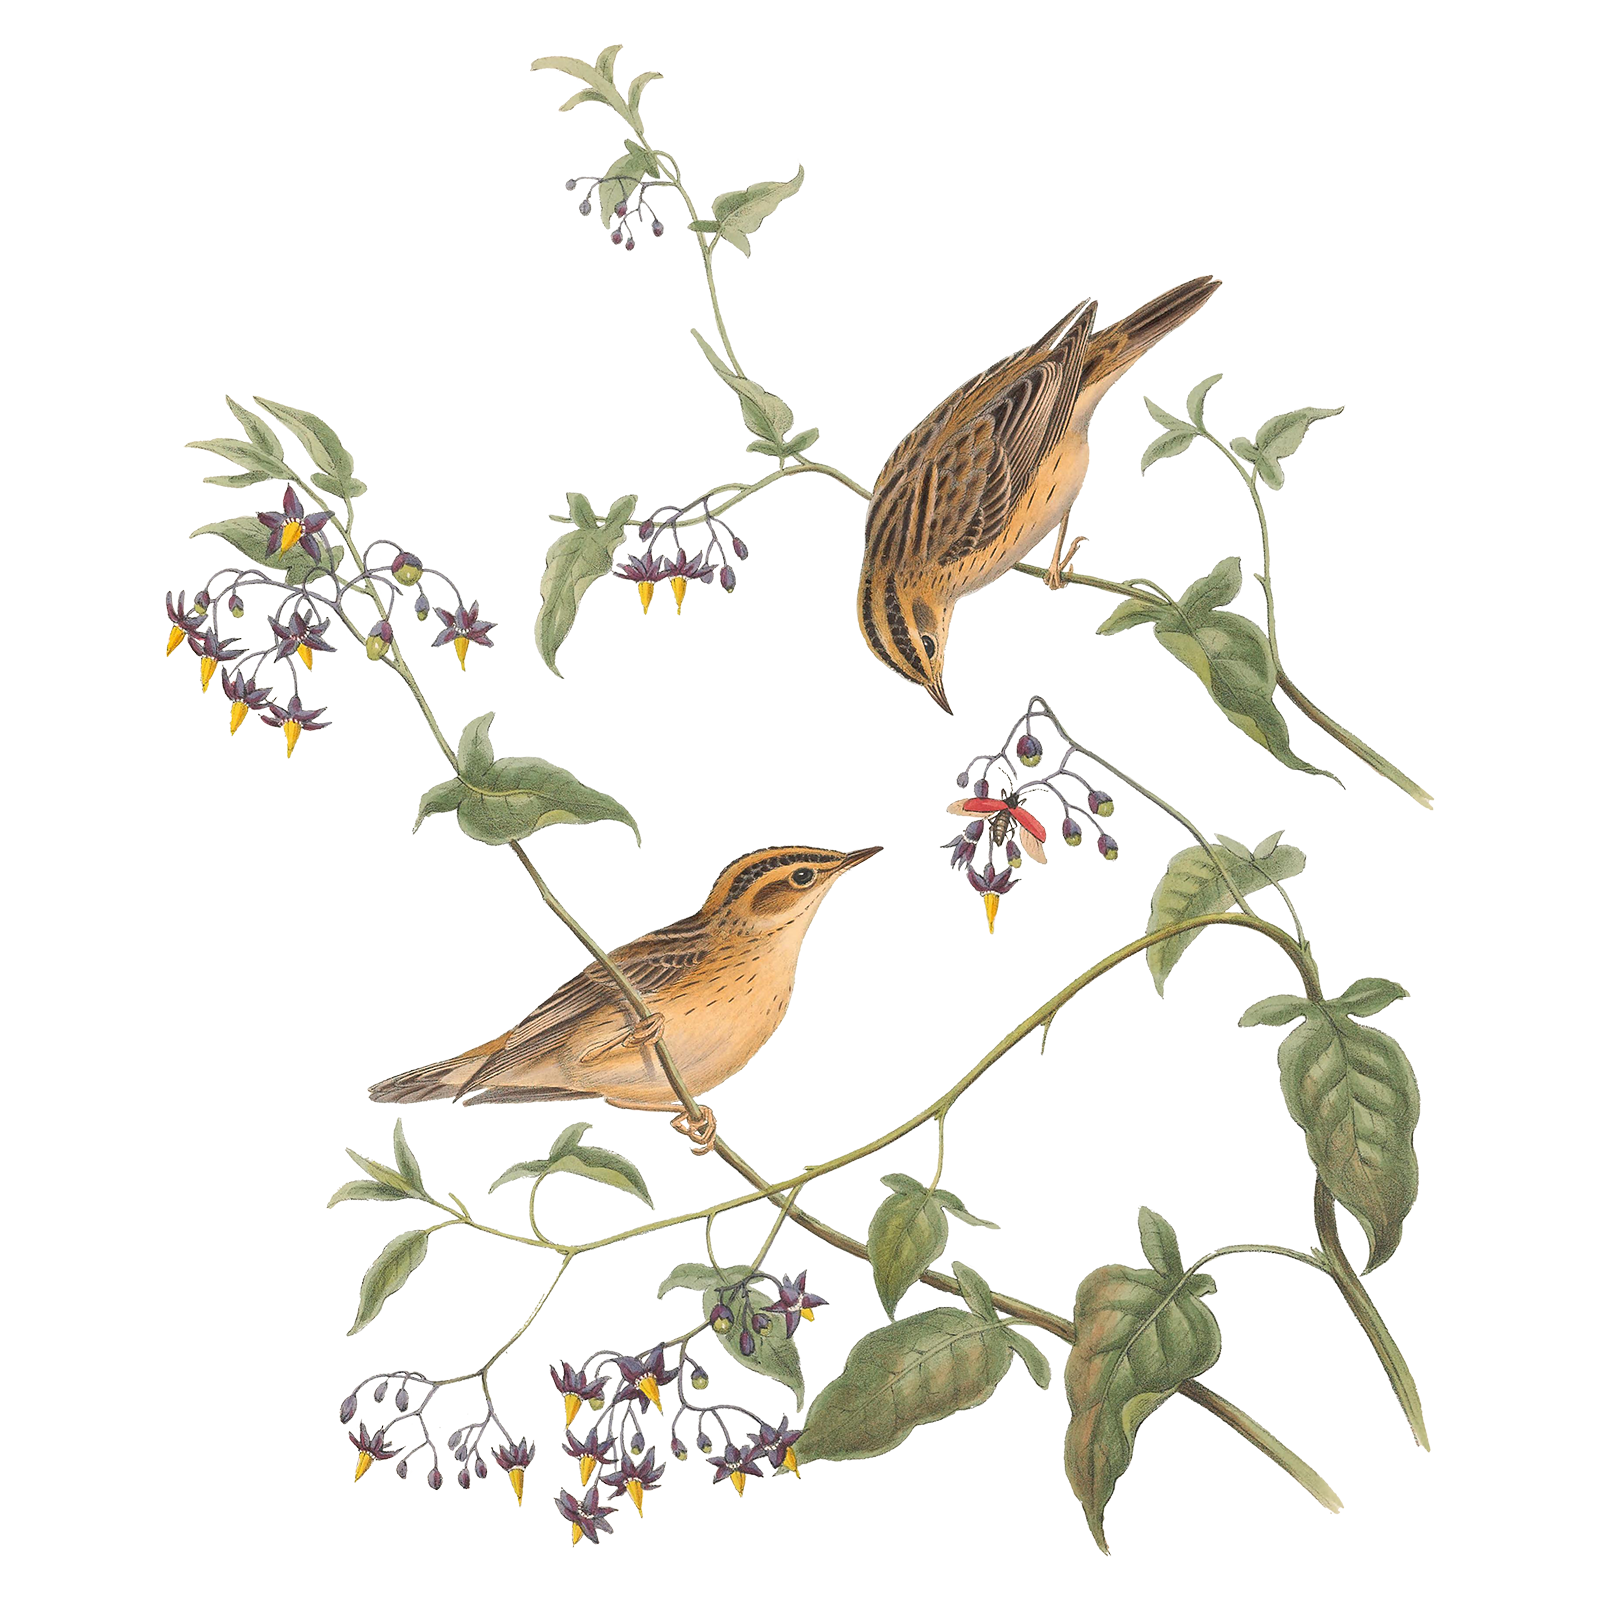 Illustration of two warblers in a branch preparing to eat an insect.